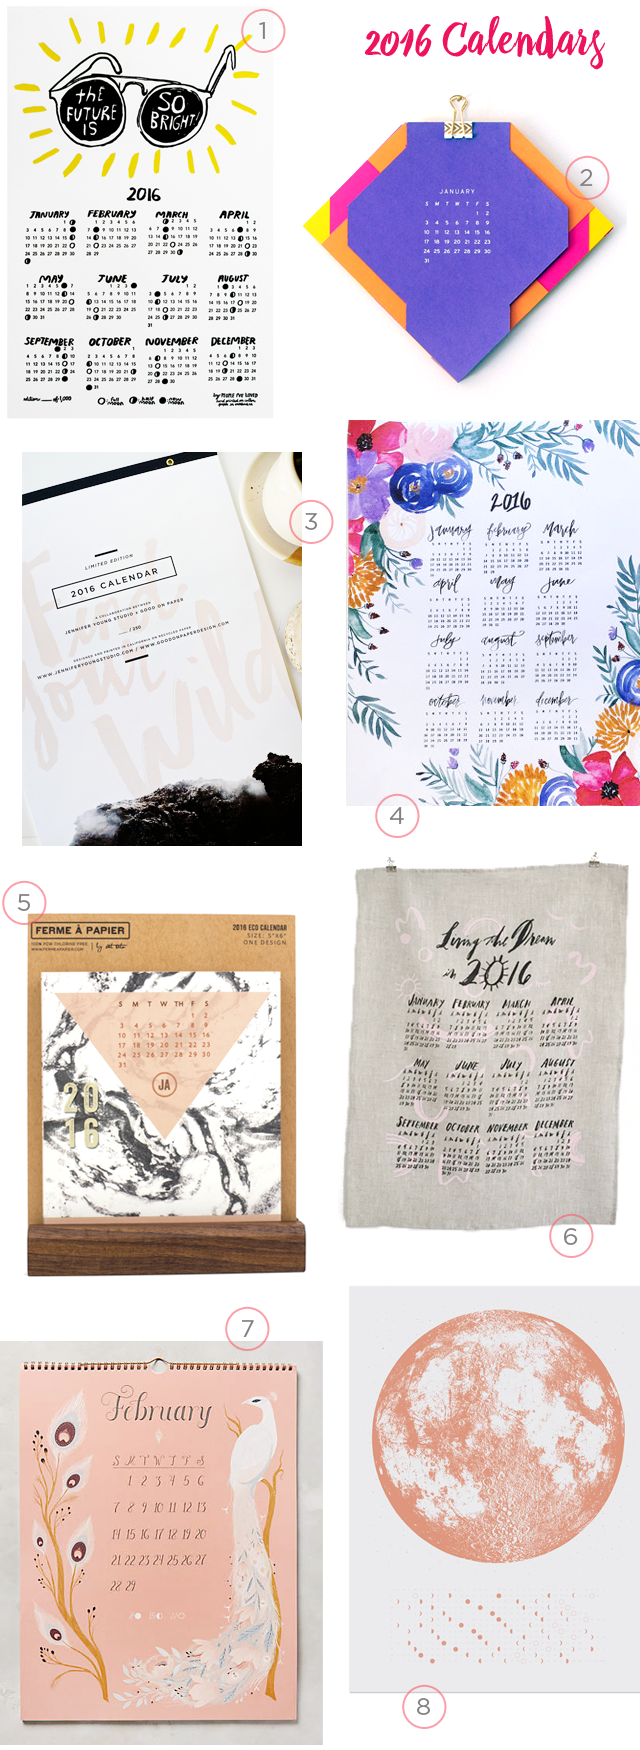 2016 Calendar Round Up / Oh So Beautiful Paper